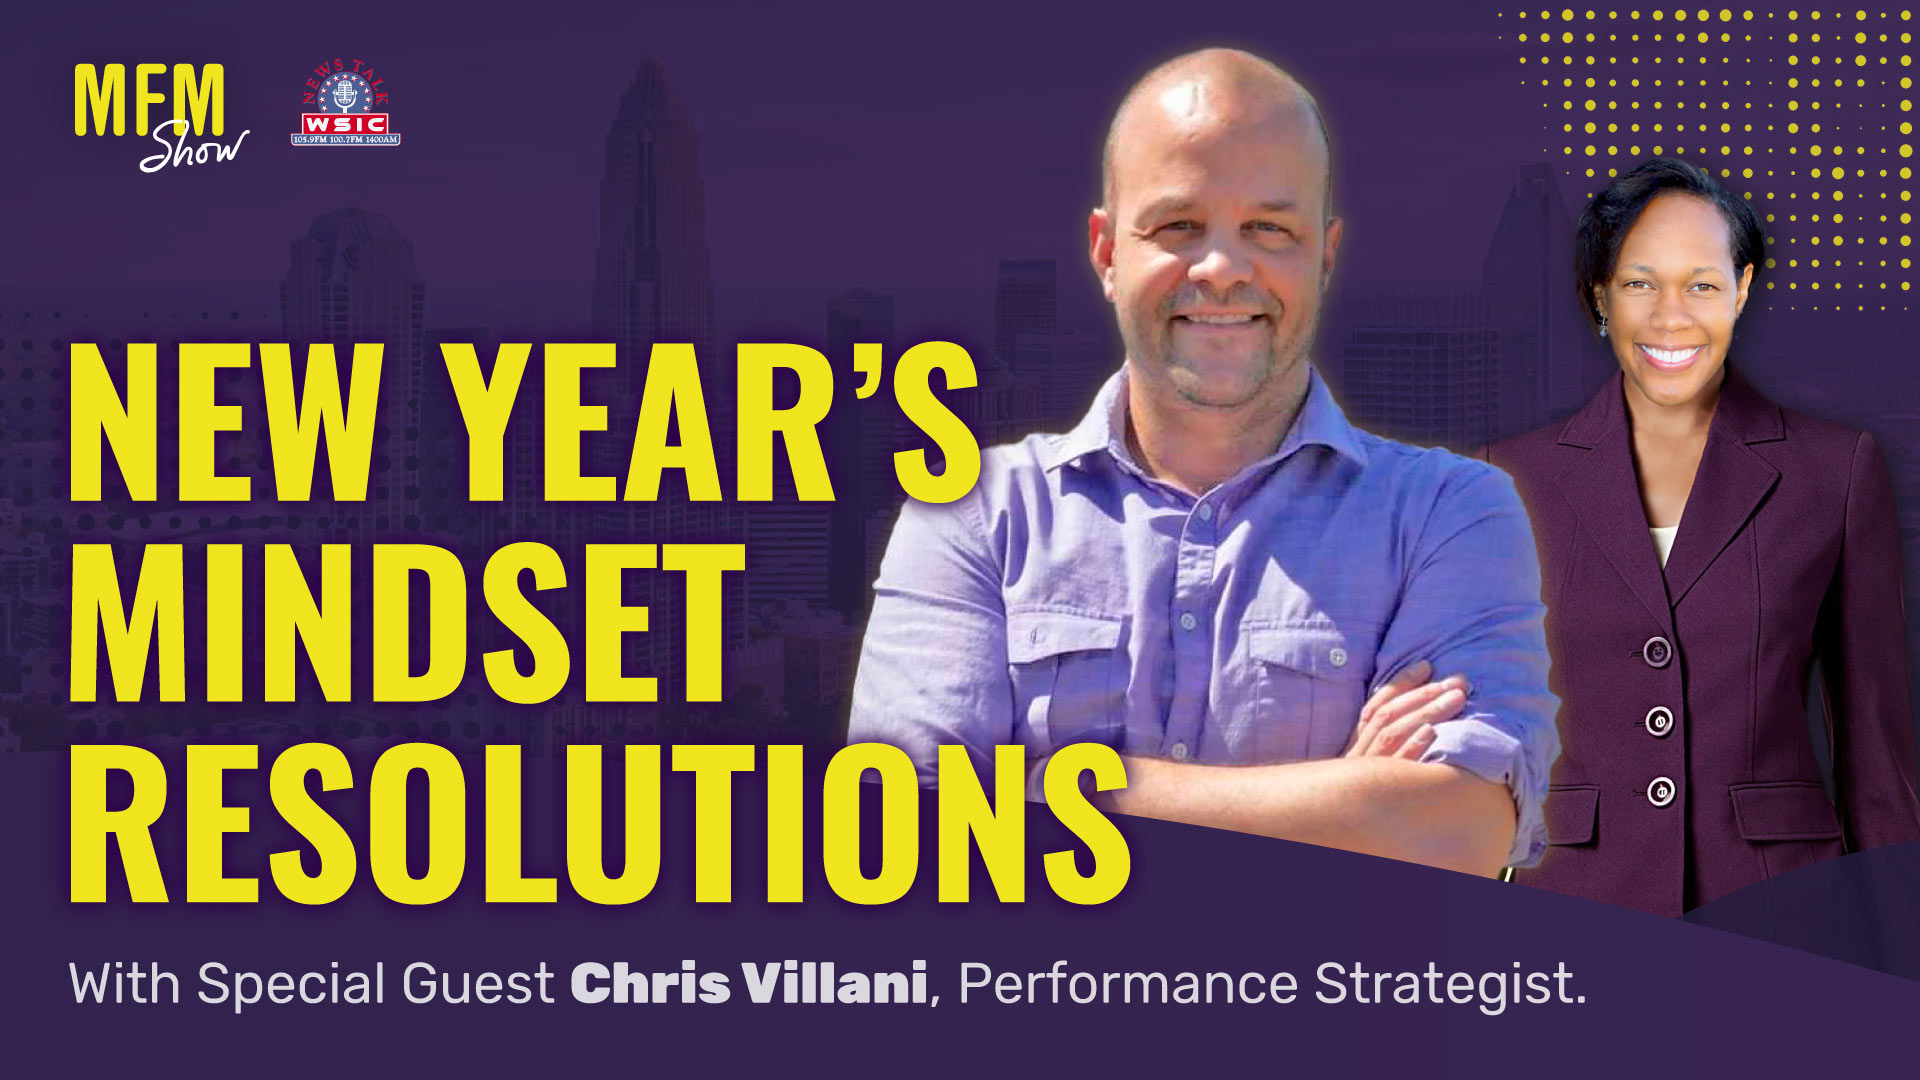 New Year's Mindset Resolutions with Chris Villani